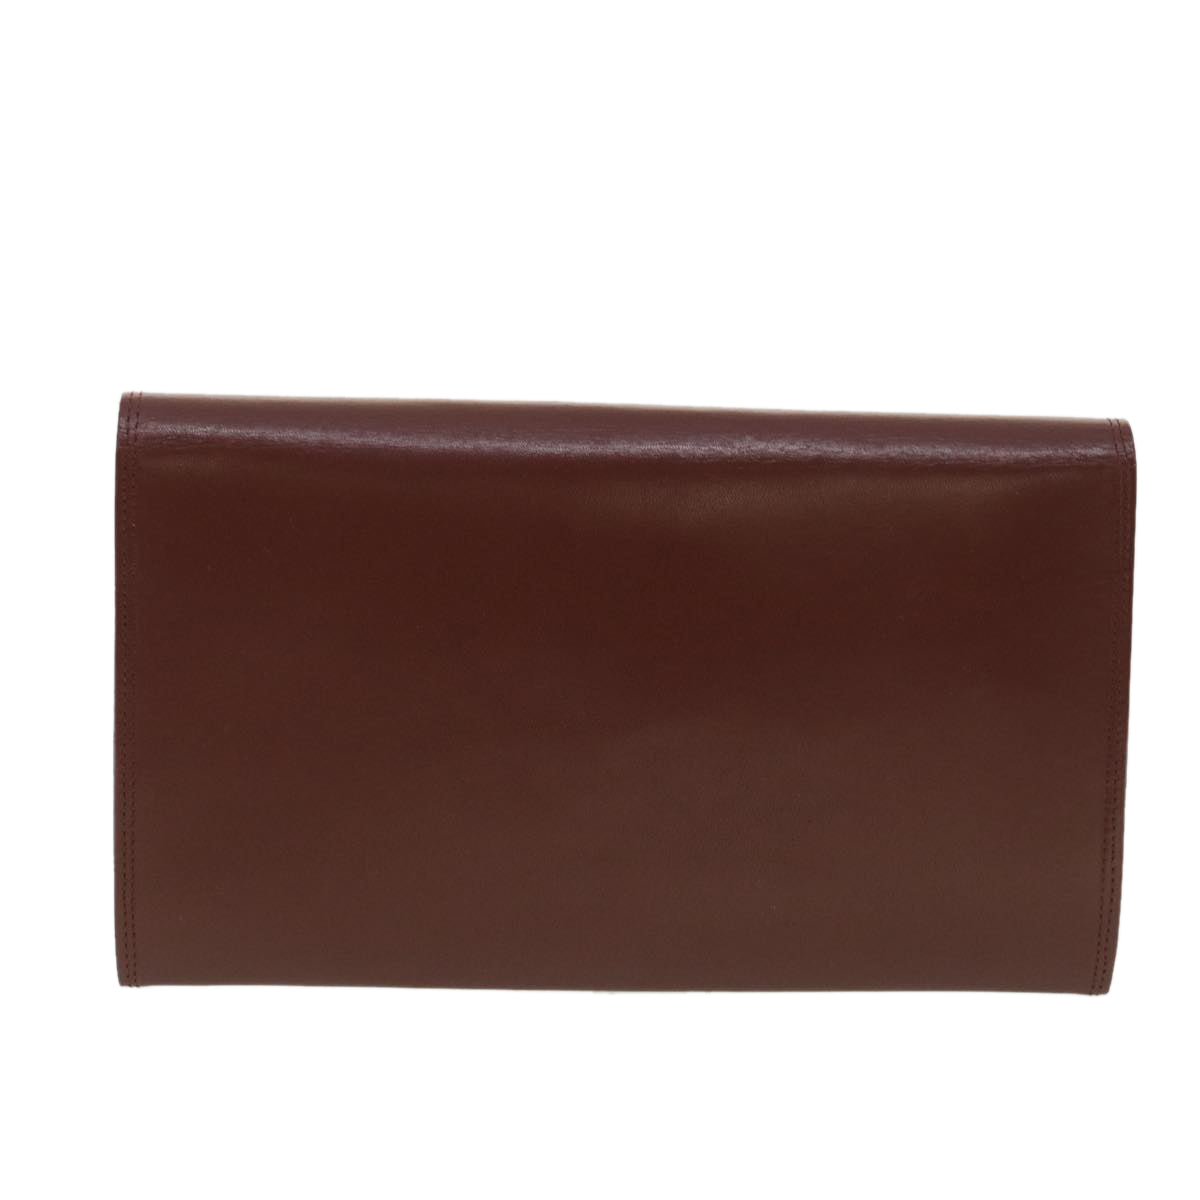 CARTIER Clutch Bag Leather Wine Red Auth 35722 - 0